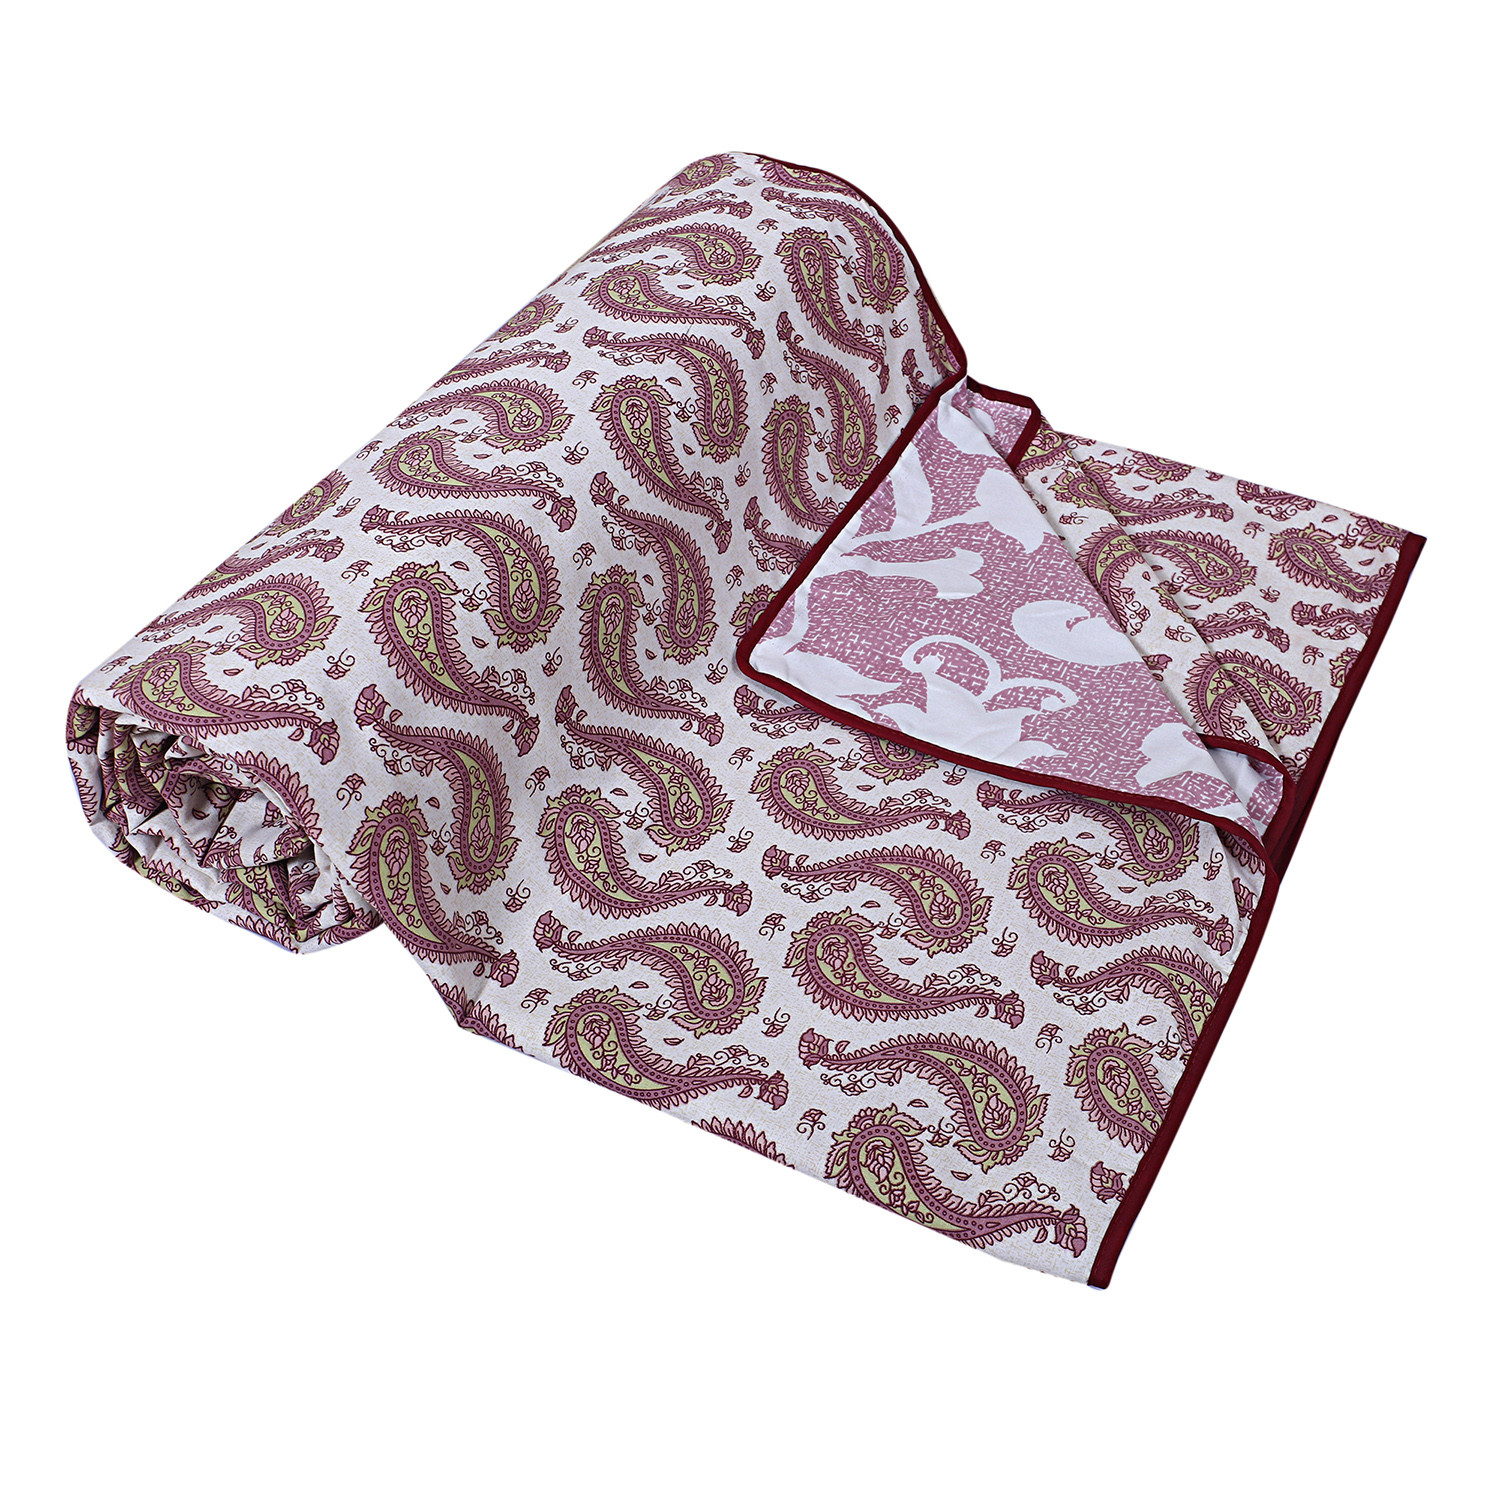 Kuber Industries Lightweight Carry Design Cotton Reversible Double Bed Dohar|AC Blanket For Home & Travelling (Pink)